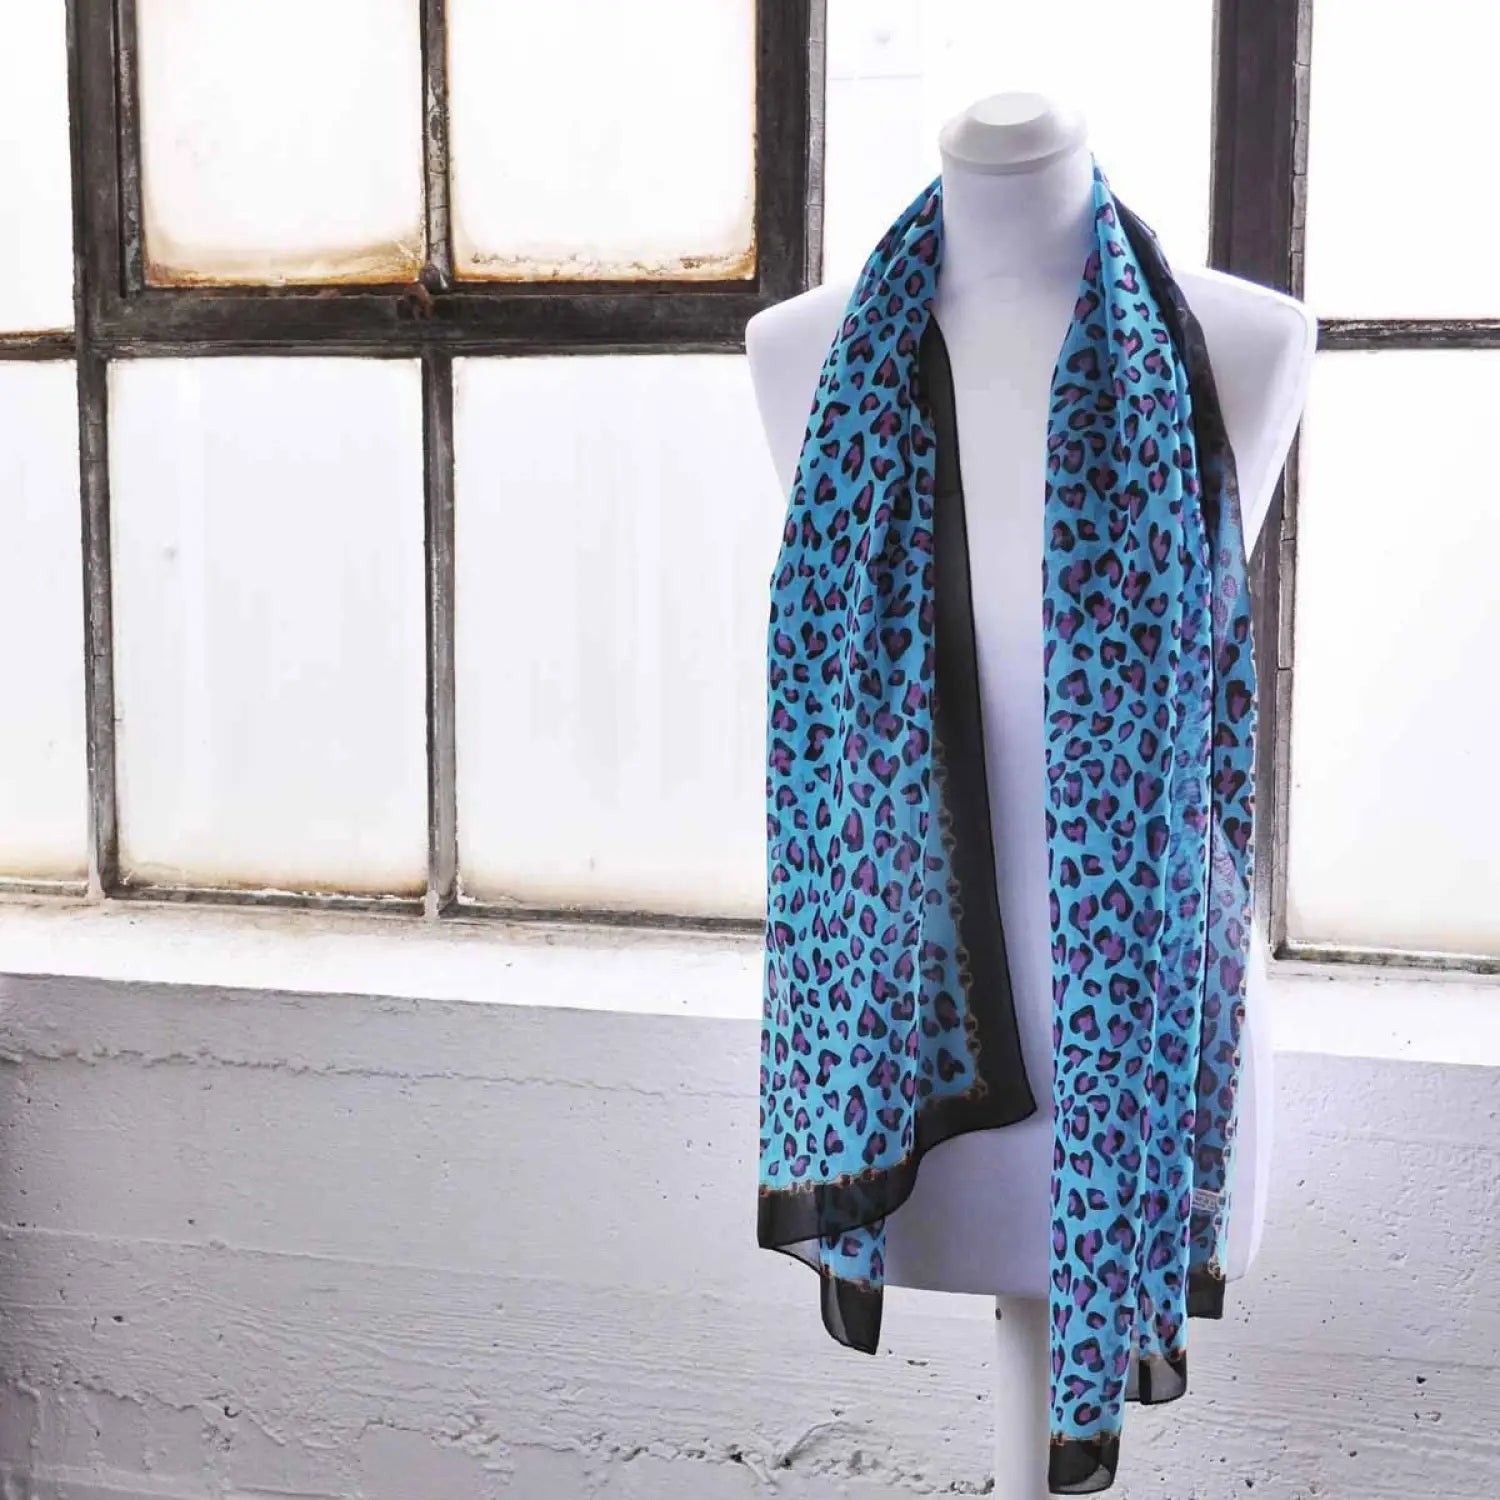 Leopard print chiffon scarf with chain border on mannequin